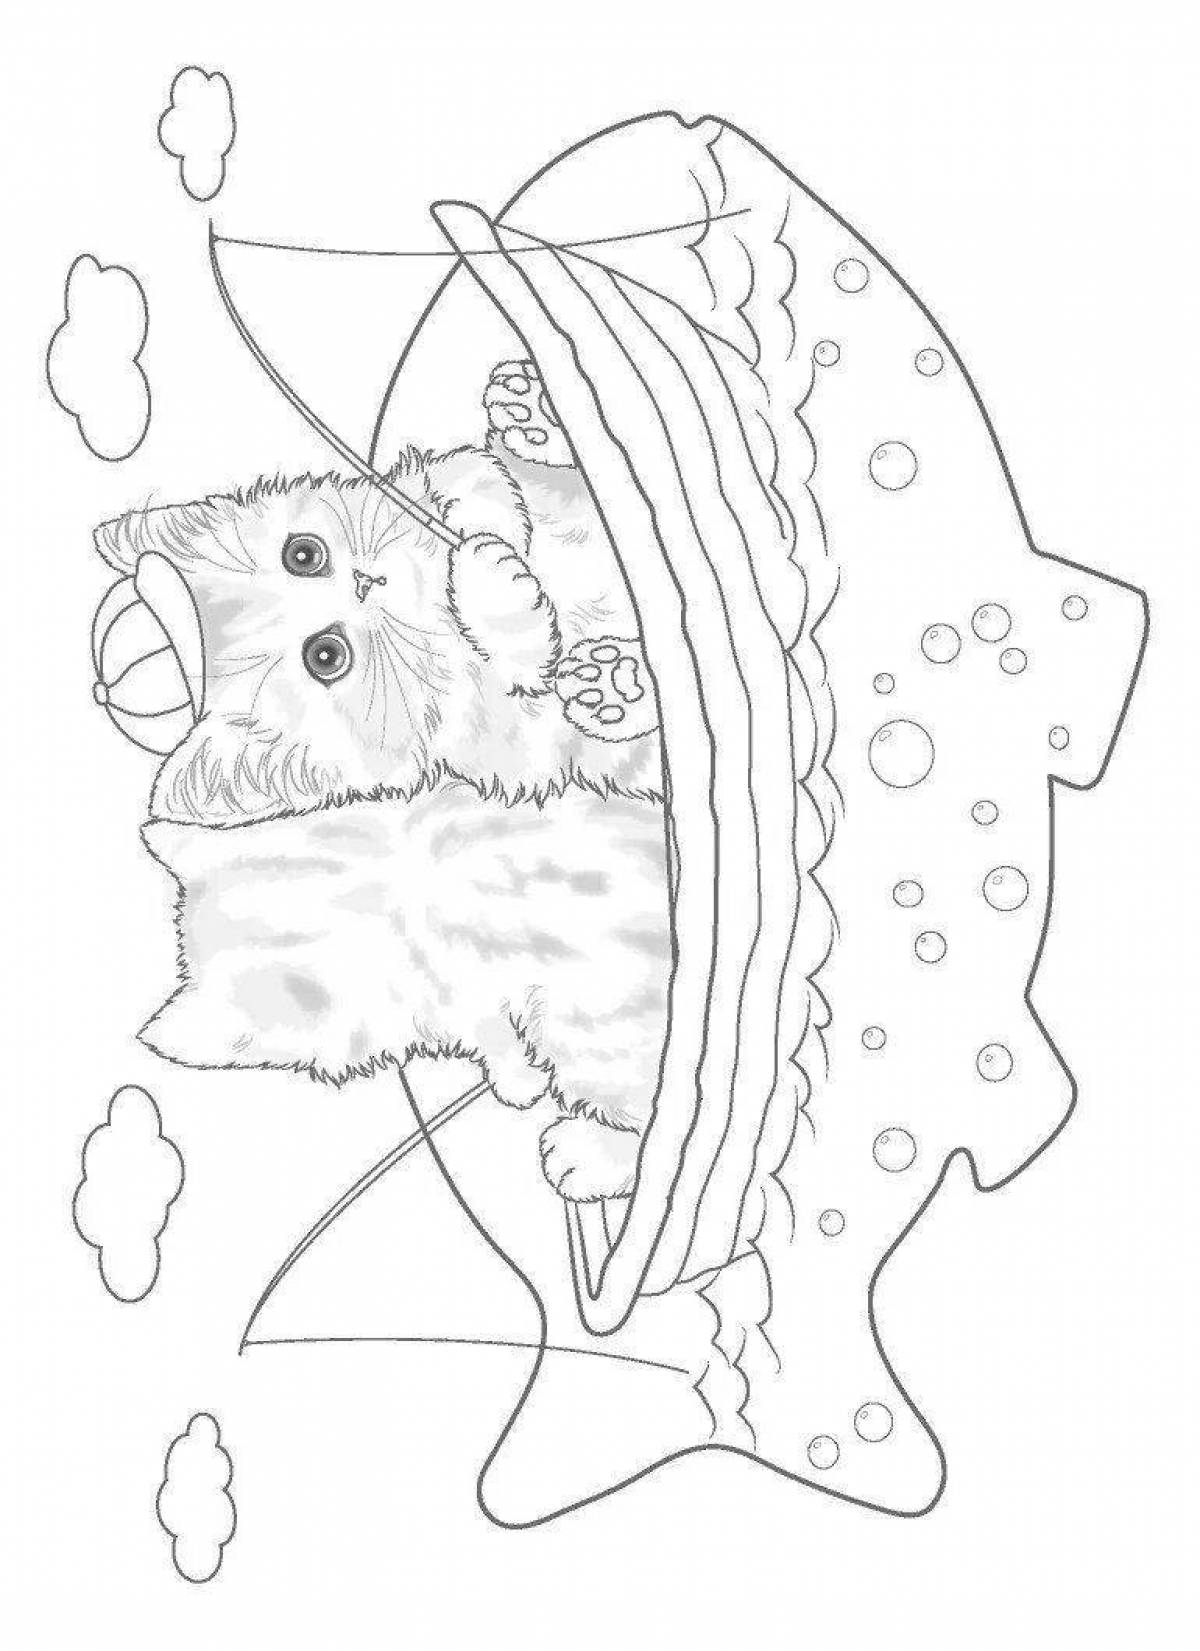 Tiny kitten in a cup coloring page